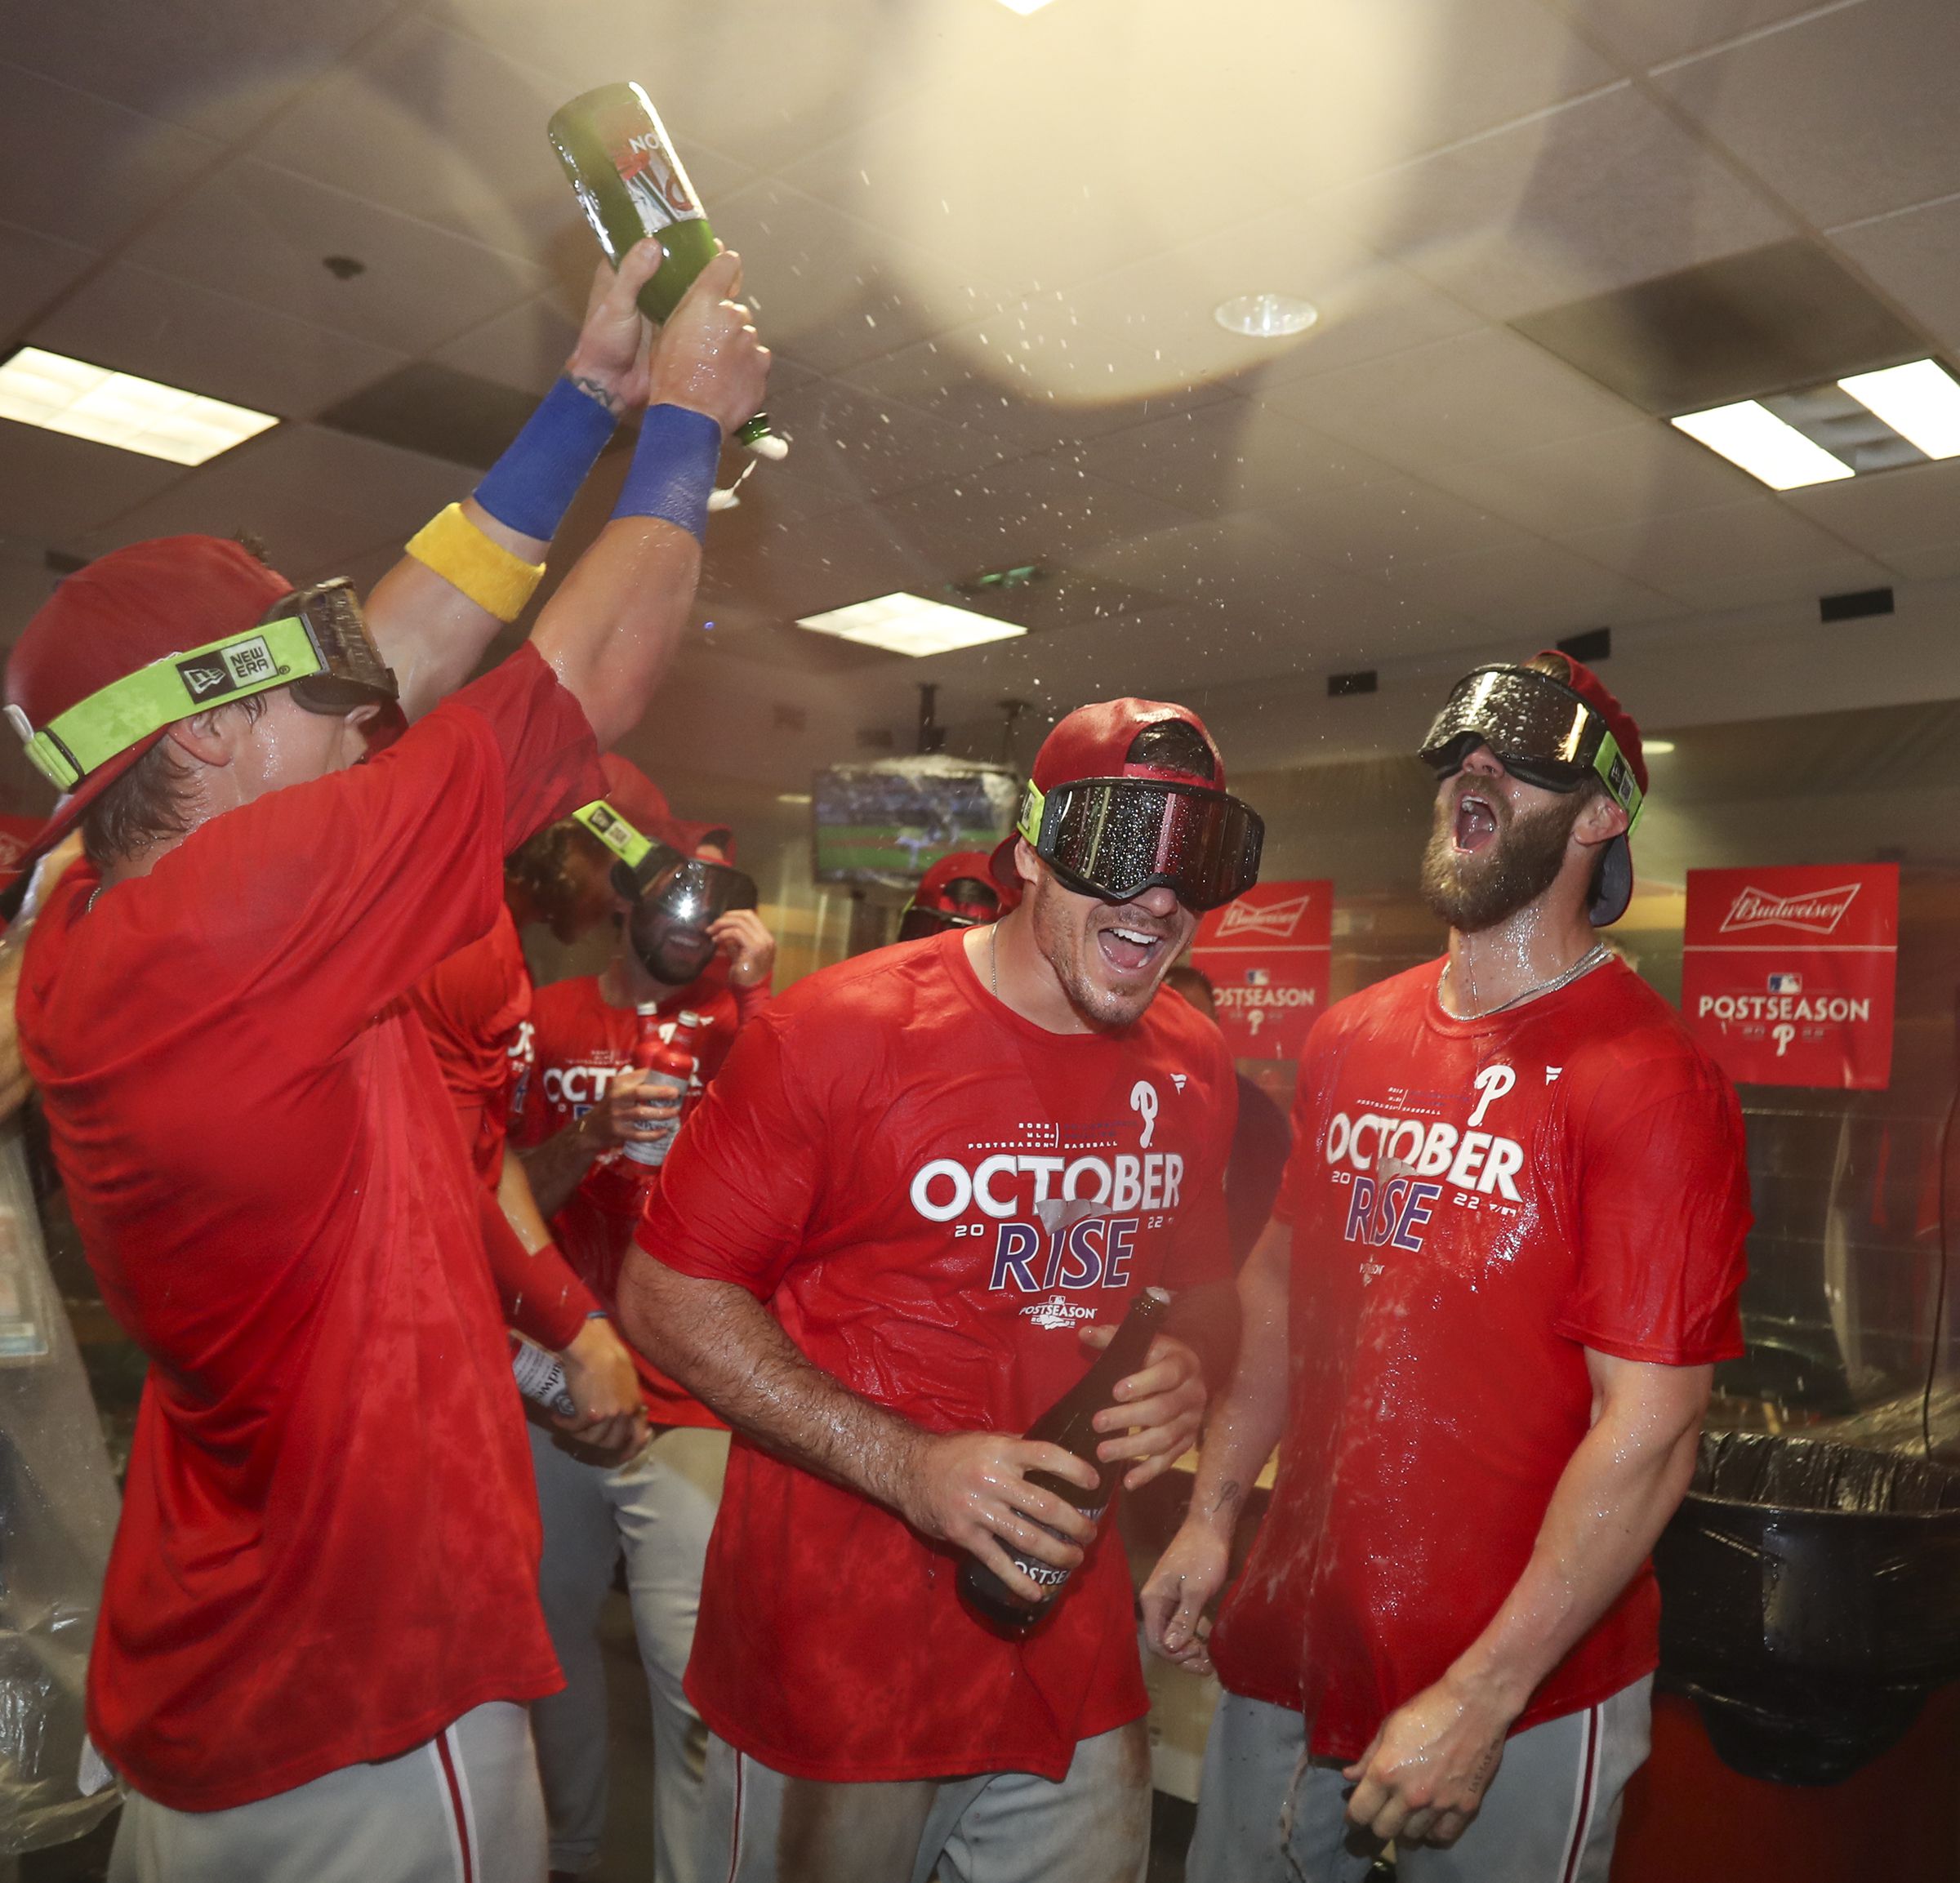 Phillies celebrate punching MLB playoff ticket after a decade of